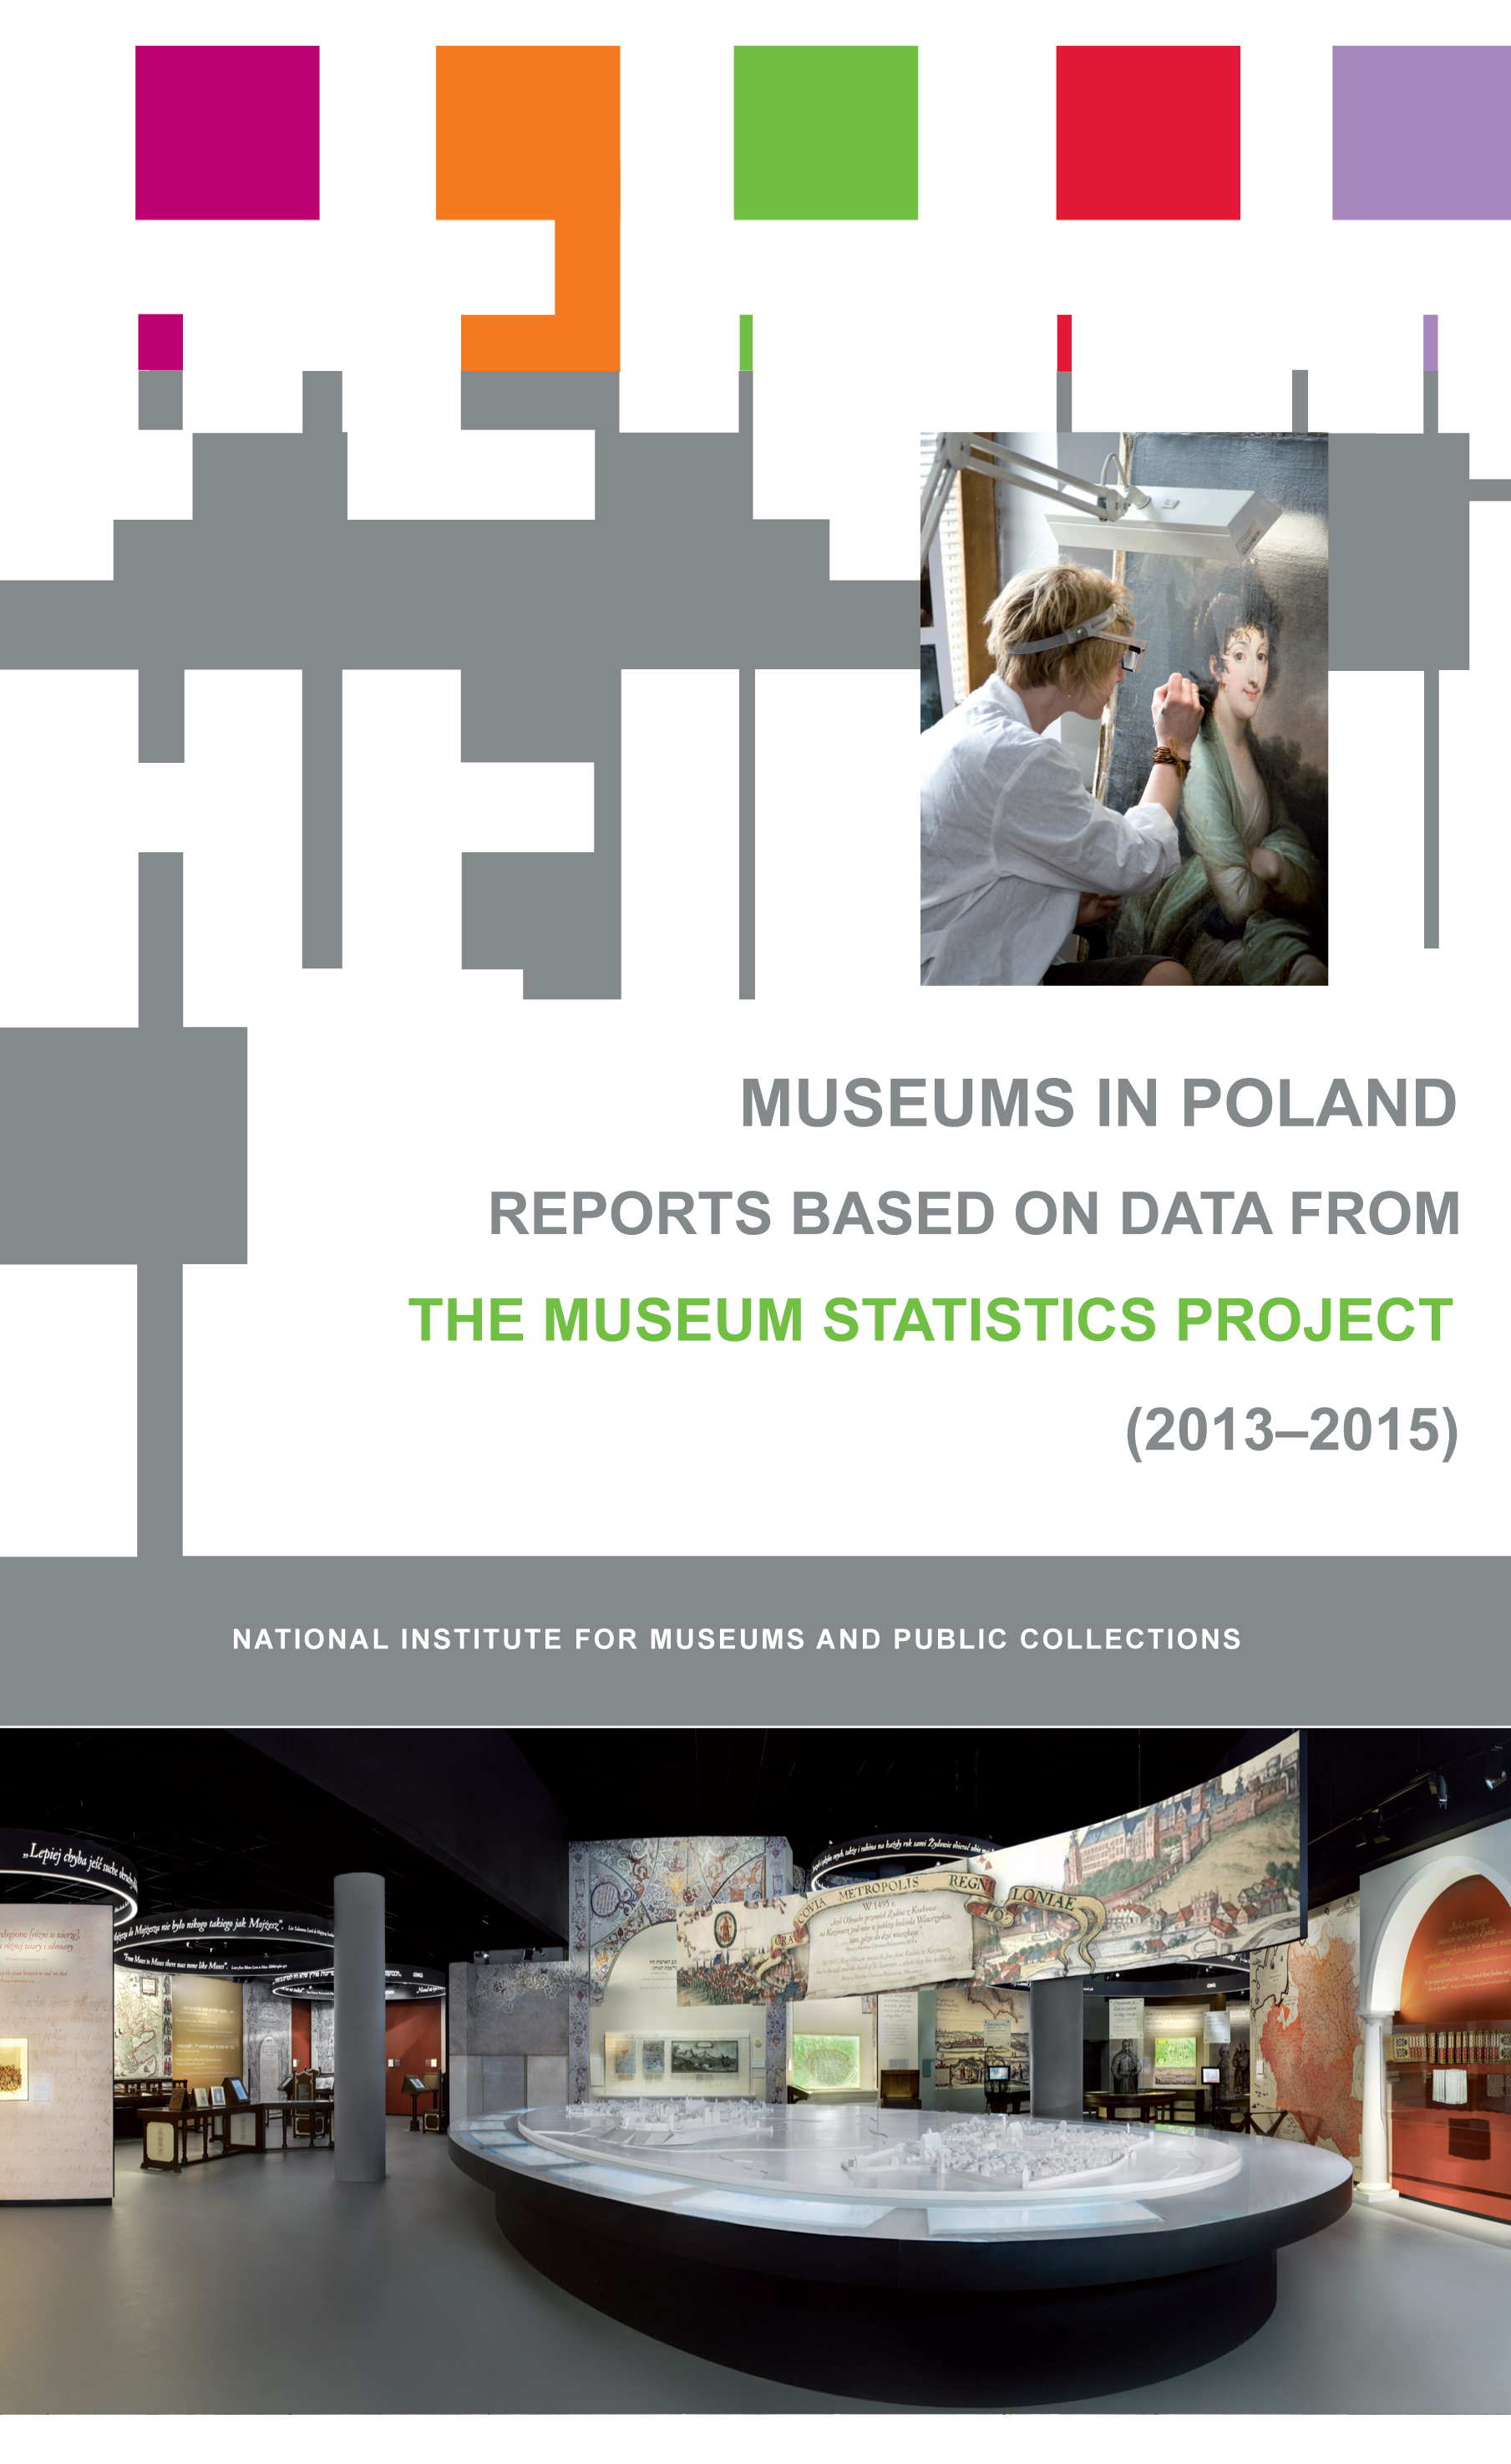 Museums in Poland. Reports based on data from the Museum Statistics Project (2013-2015)